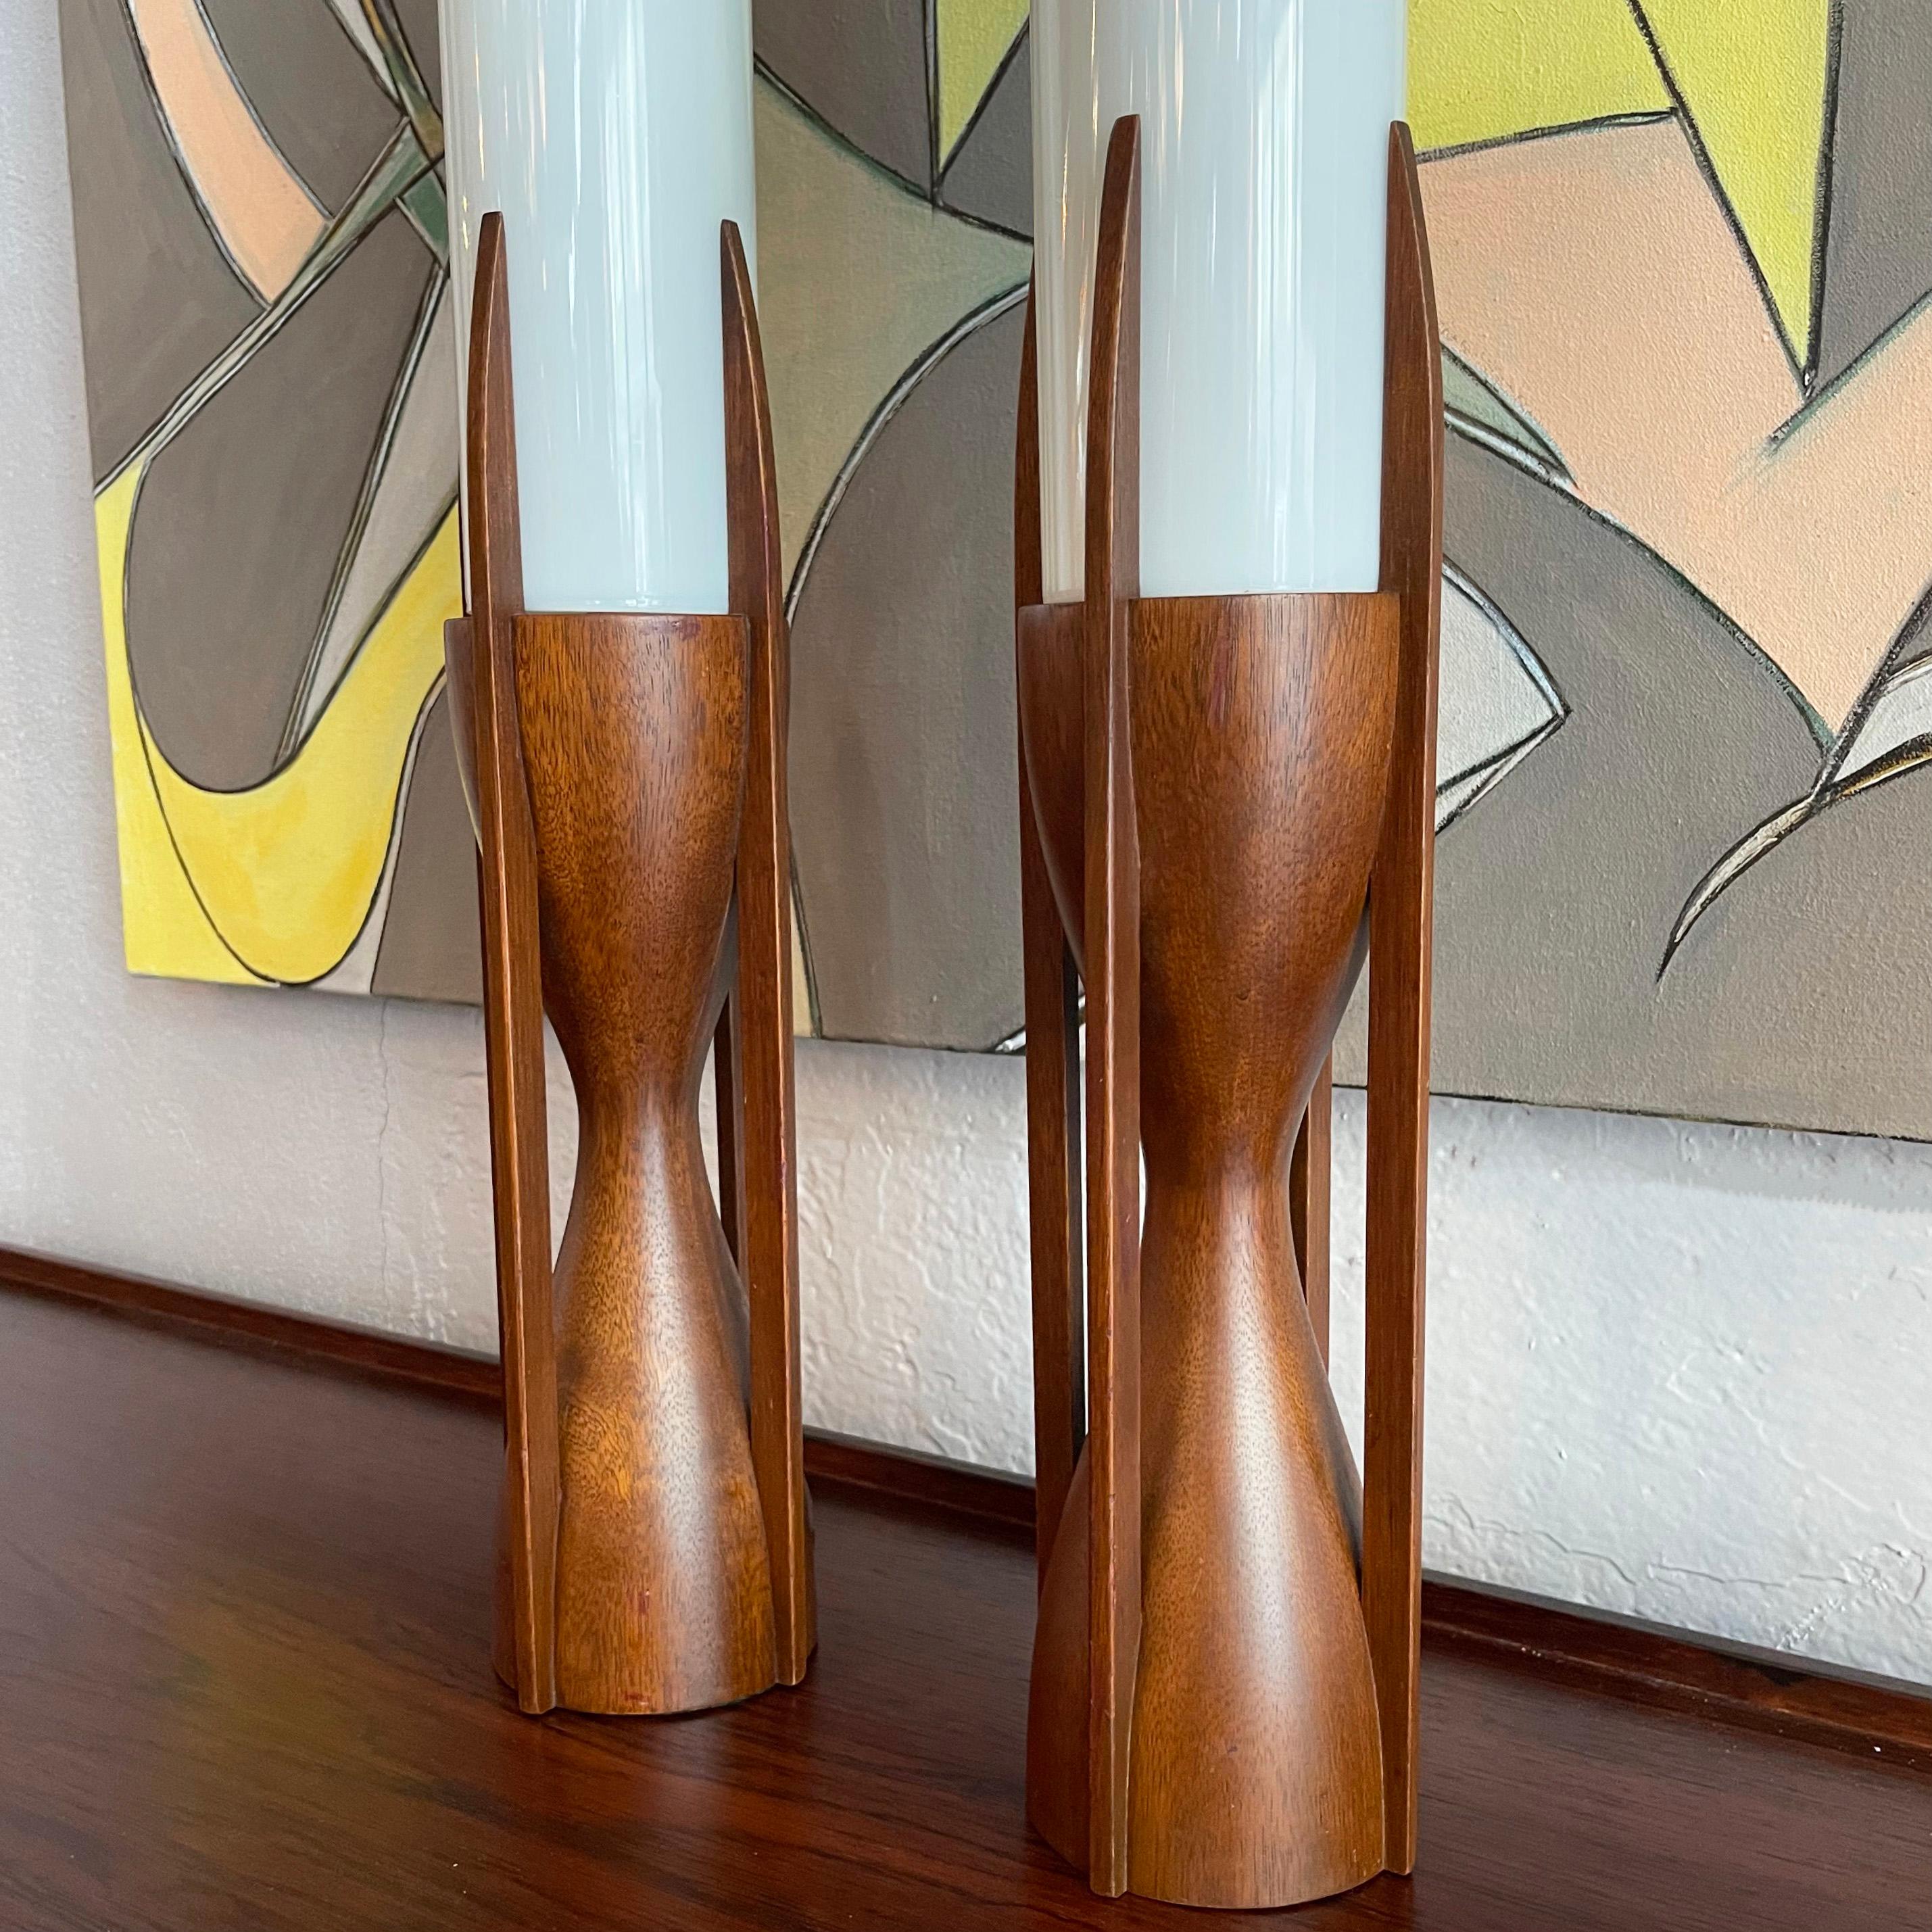 20th Century Mid-Century Walnut Milk Glass Cylinder Table Lamps By Byron Botker For Modeline For Sale